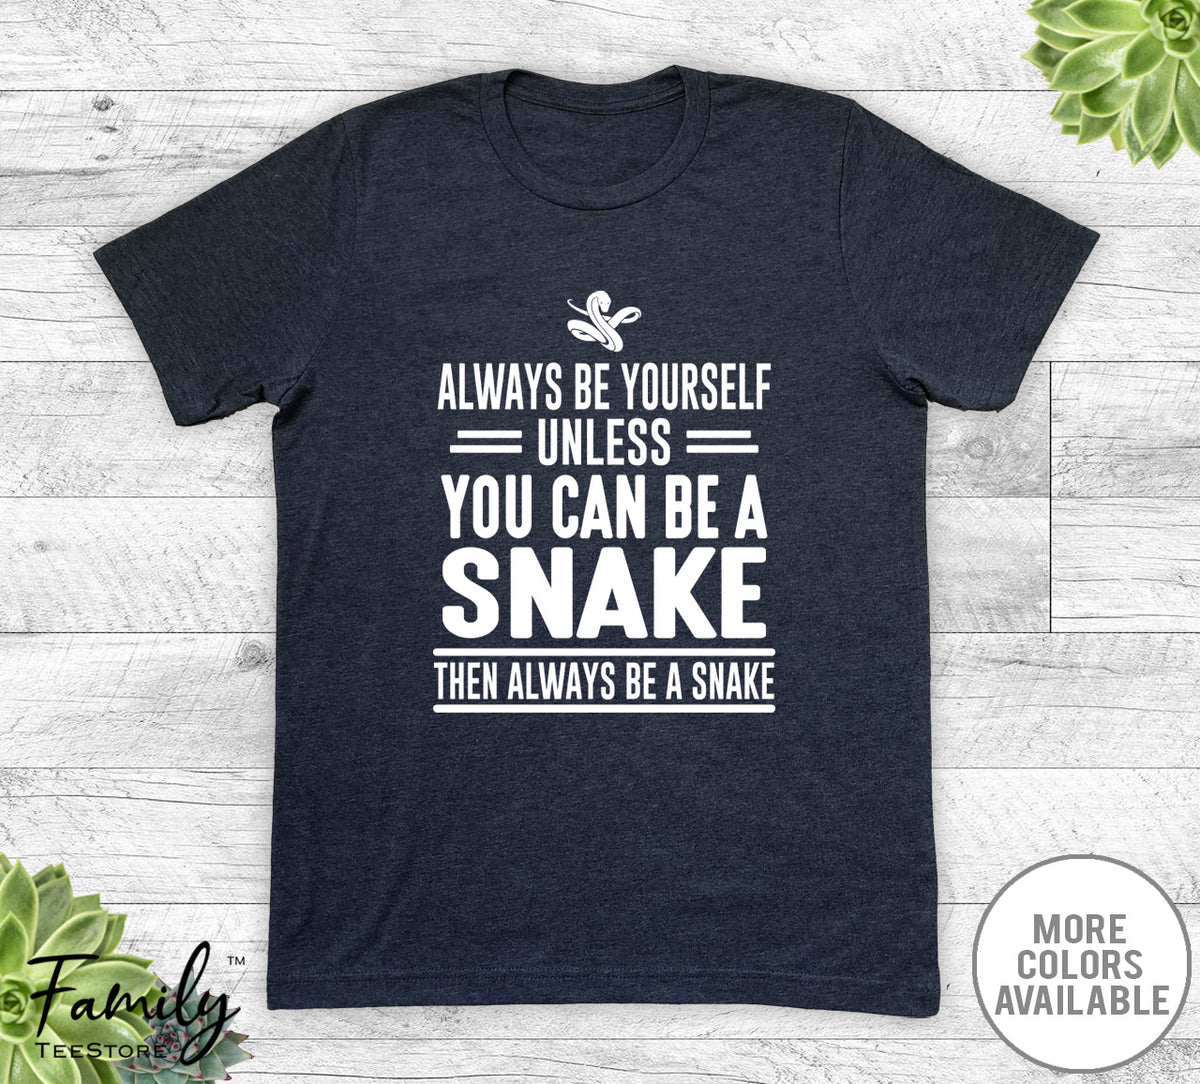 Always Be Yourself Unless You Can Be A Snake - Unisex T-shirt - Snake Shirt - Snake Gift